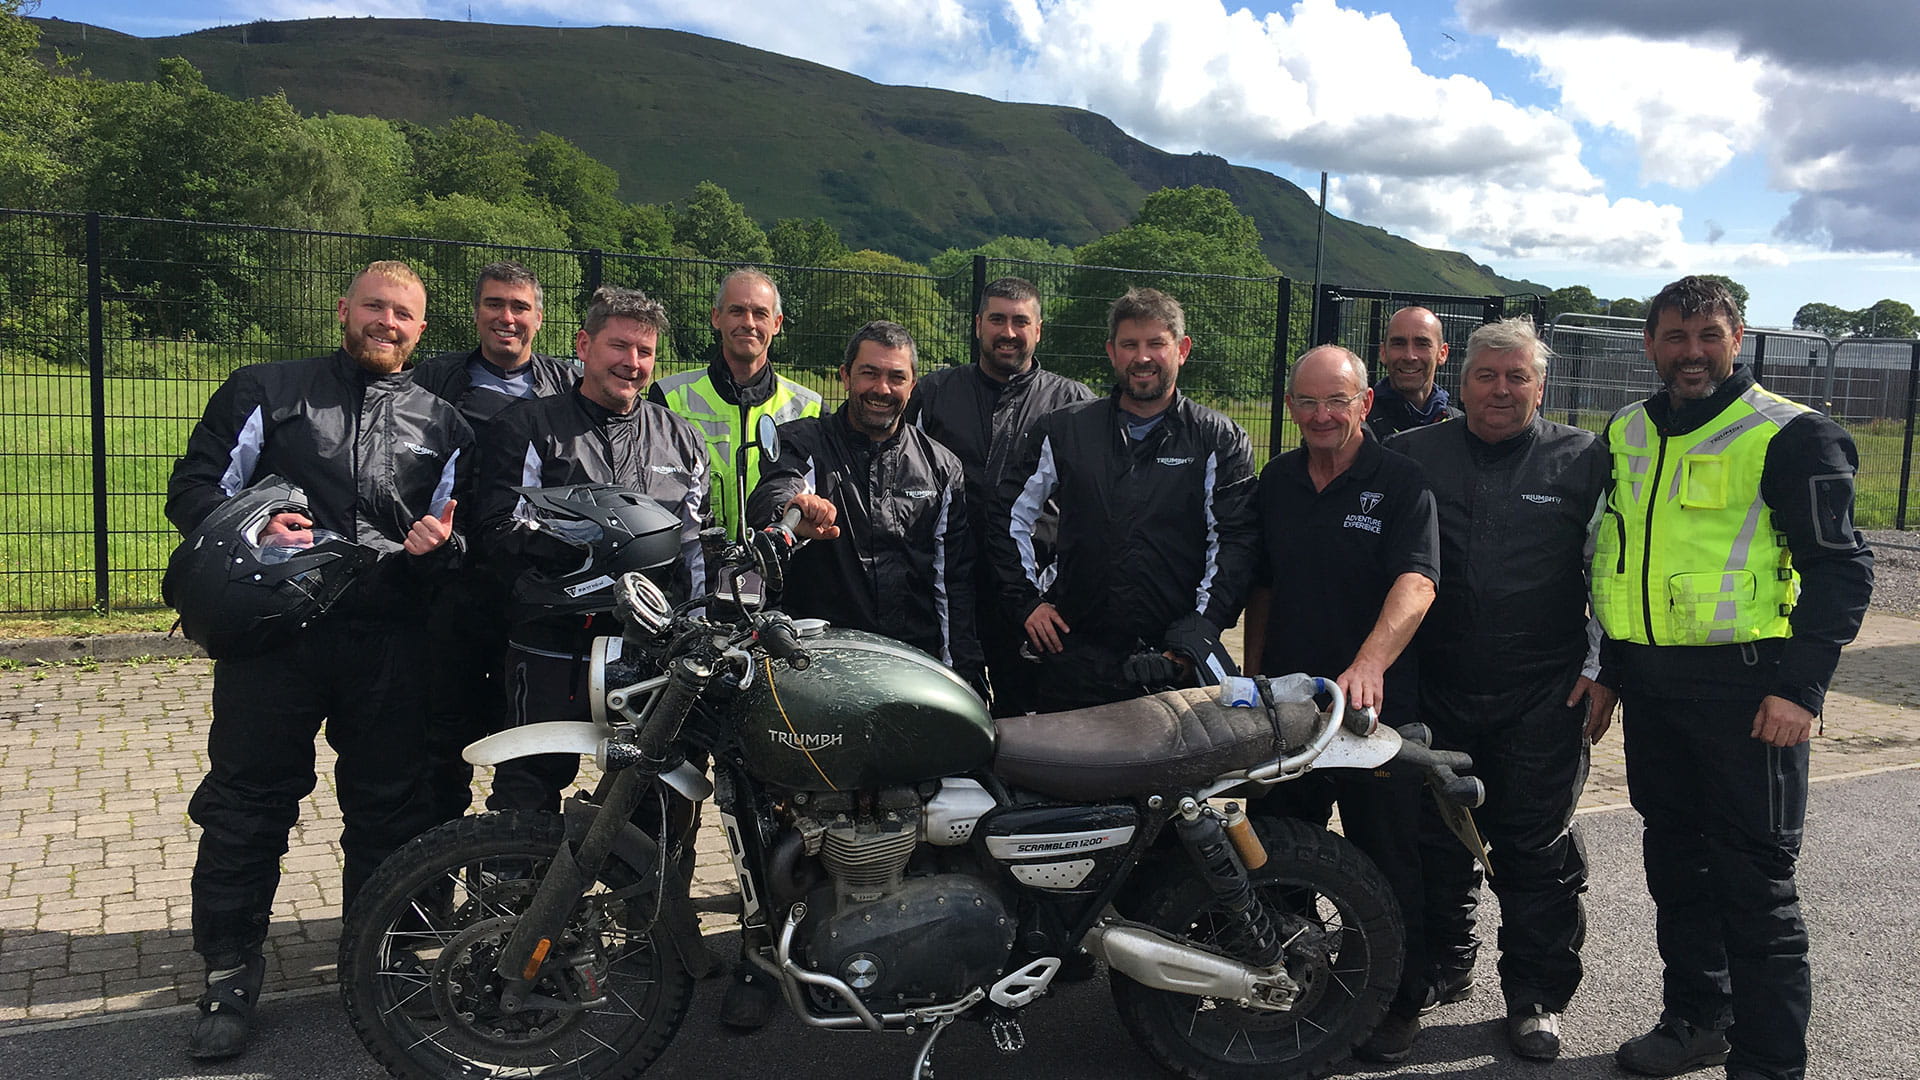 Group shot of the rider participants on the training course for riding the Triumph Scrambler 1200 XC